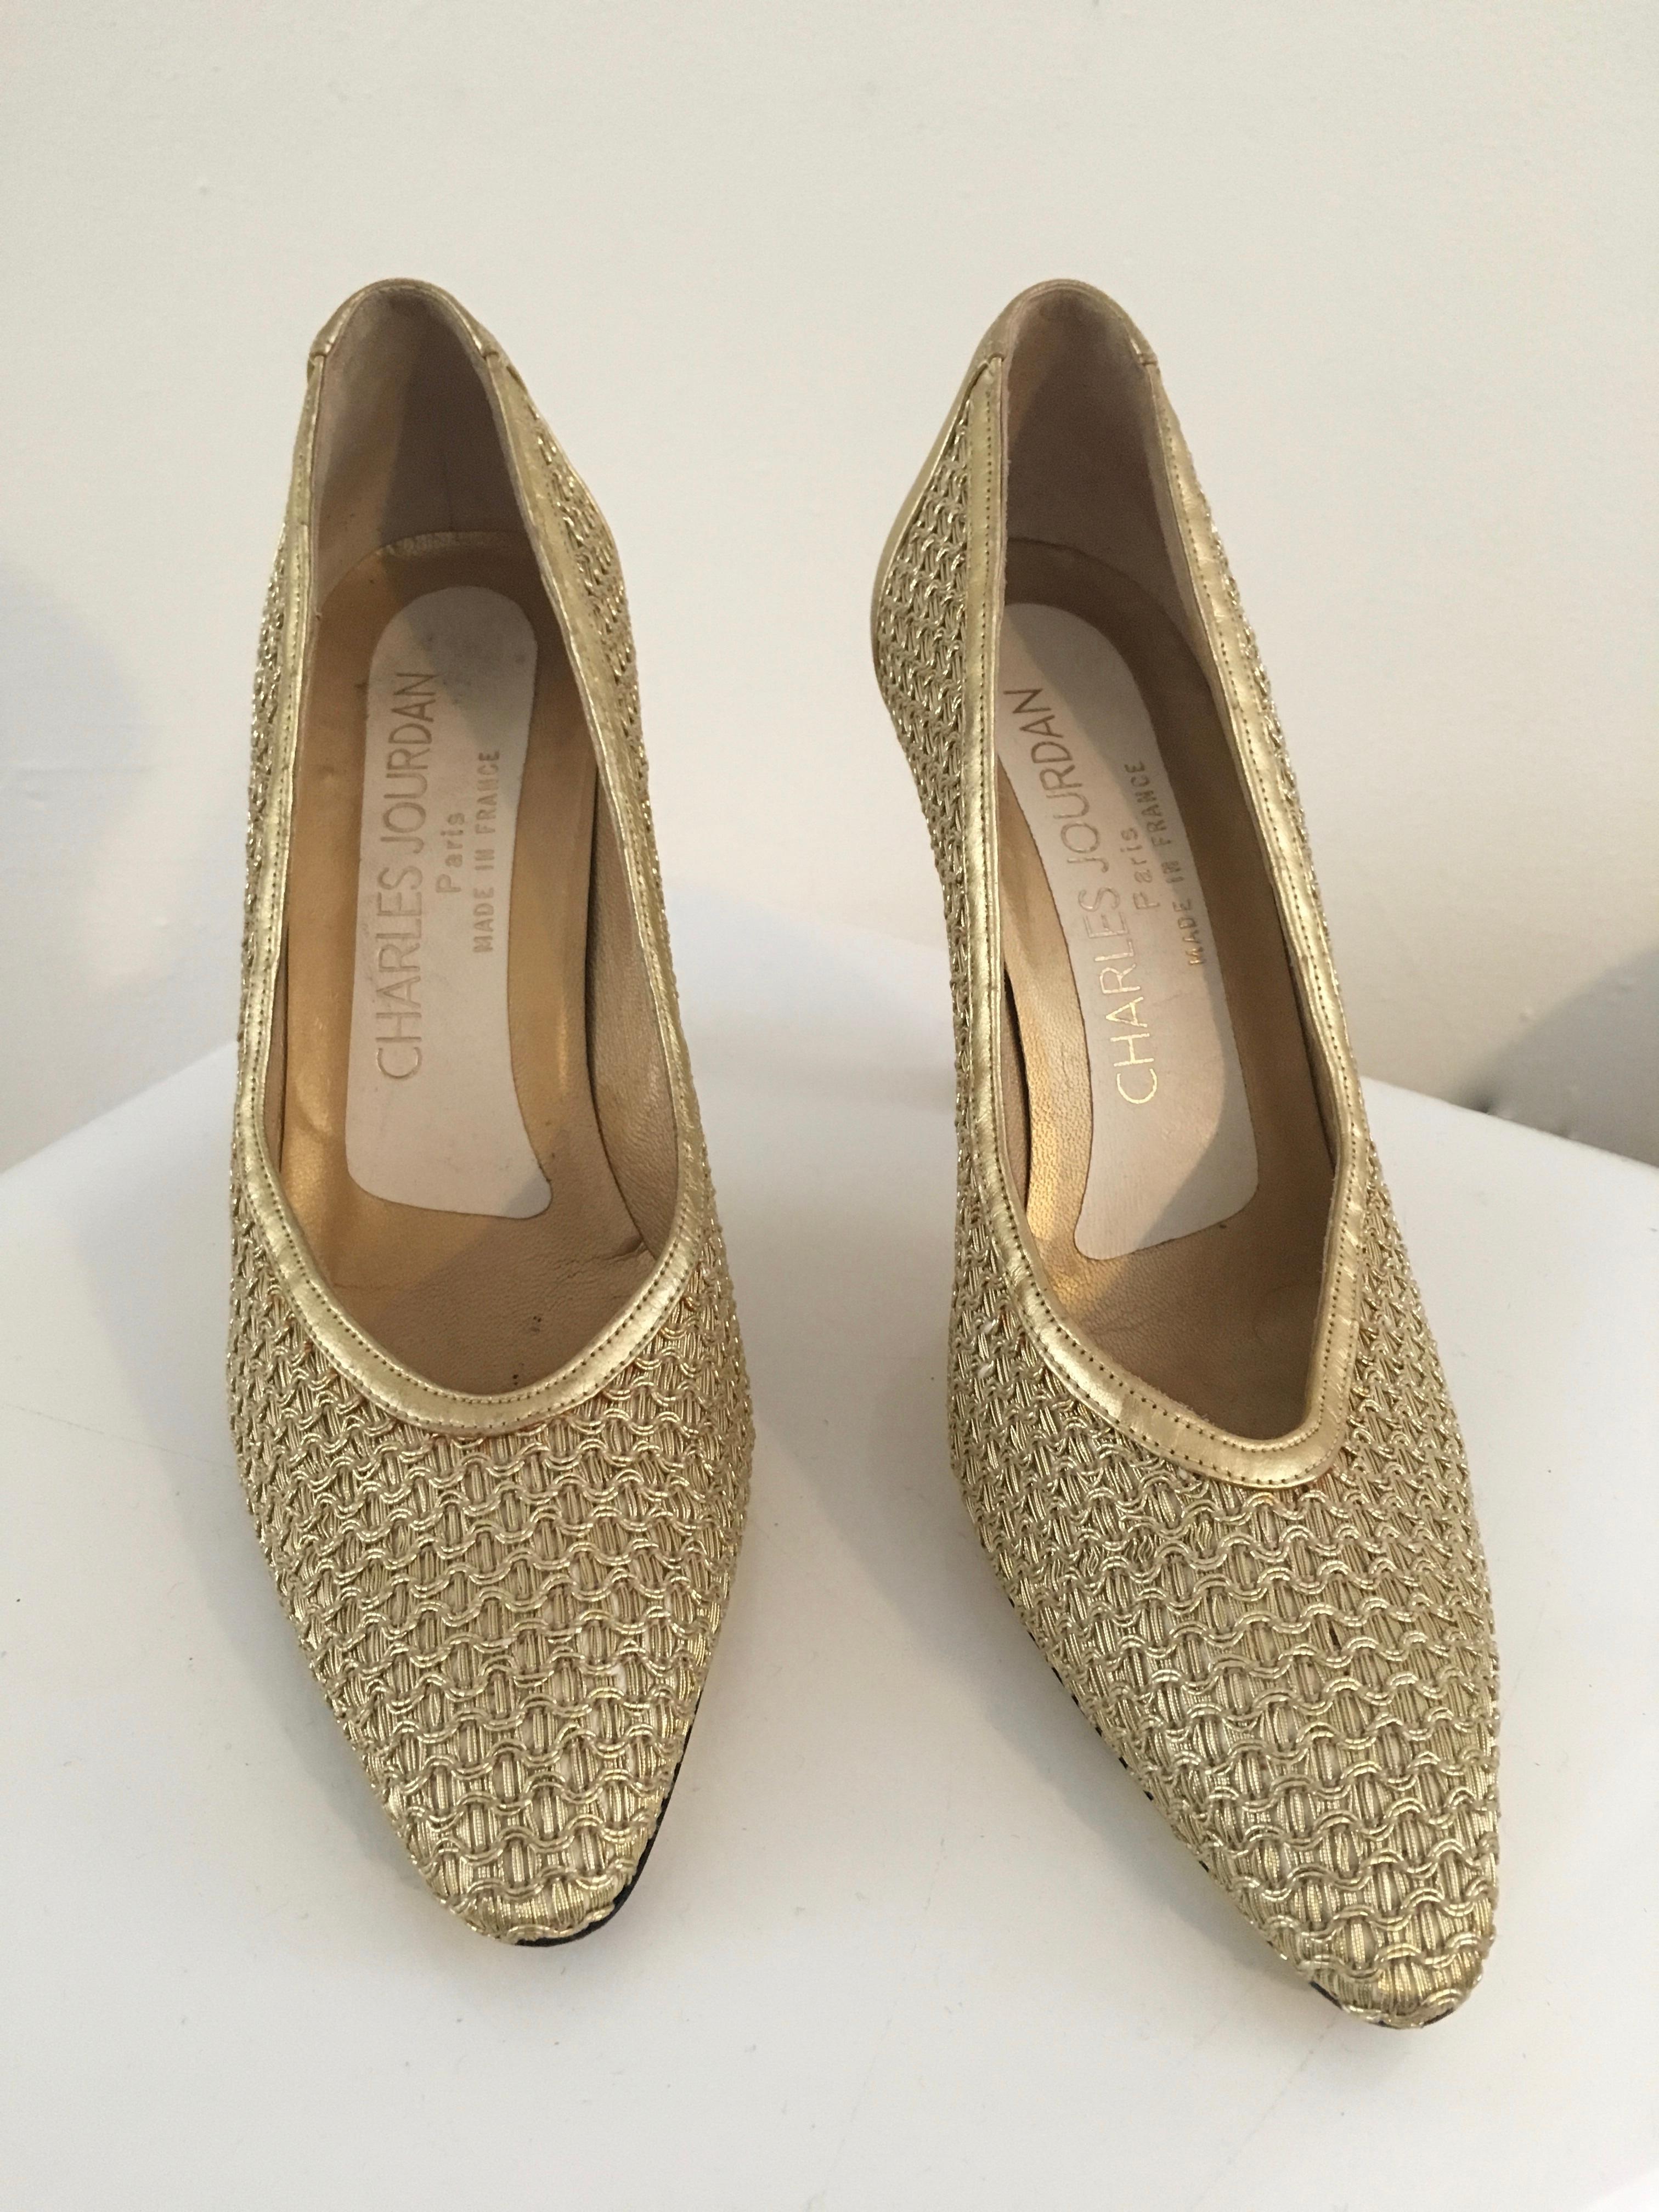 Charles Jourdan 1980s gold volupte sultane pumps are size 7M. 
Made in France. 
Ladies these Charles Jourdan gold pumps will look amazing with your Chanel suit, Versace cocktail dress or your YSL tuxedo.  
In very good condition. 
Charles Jourdan